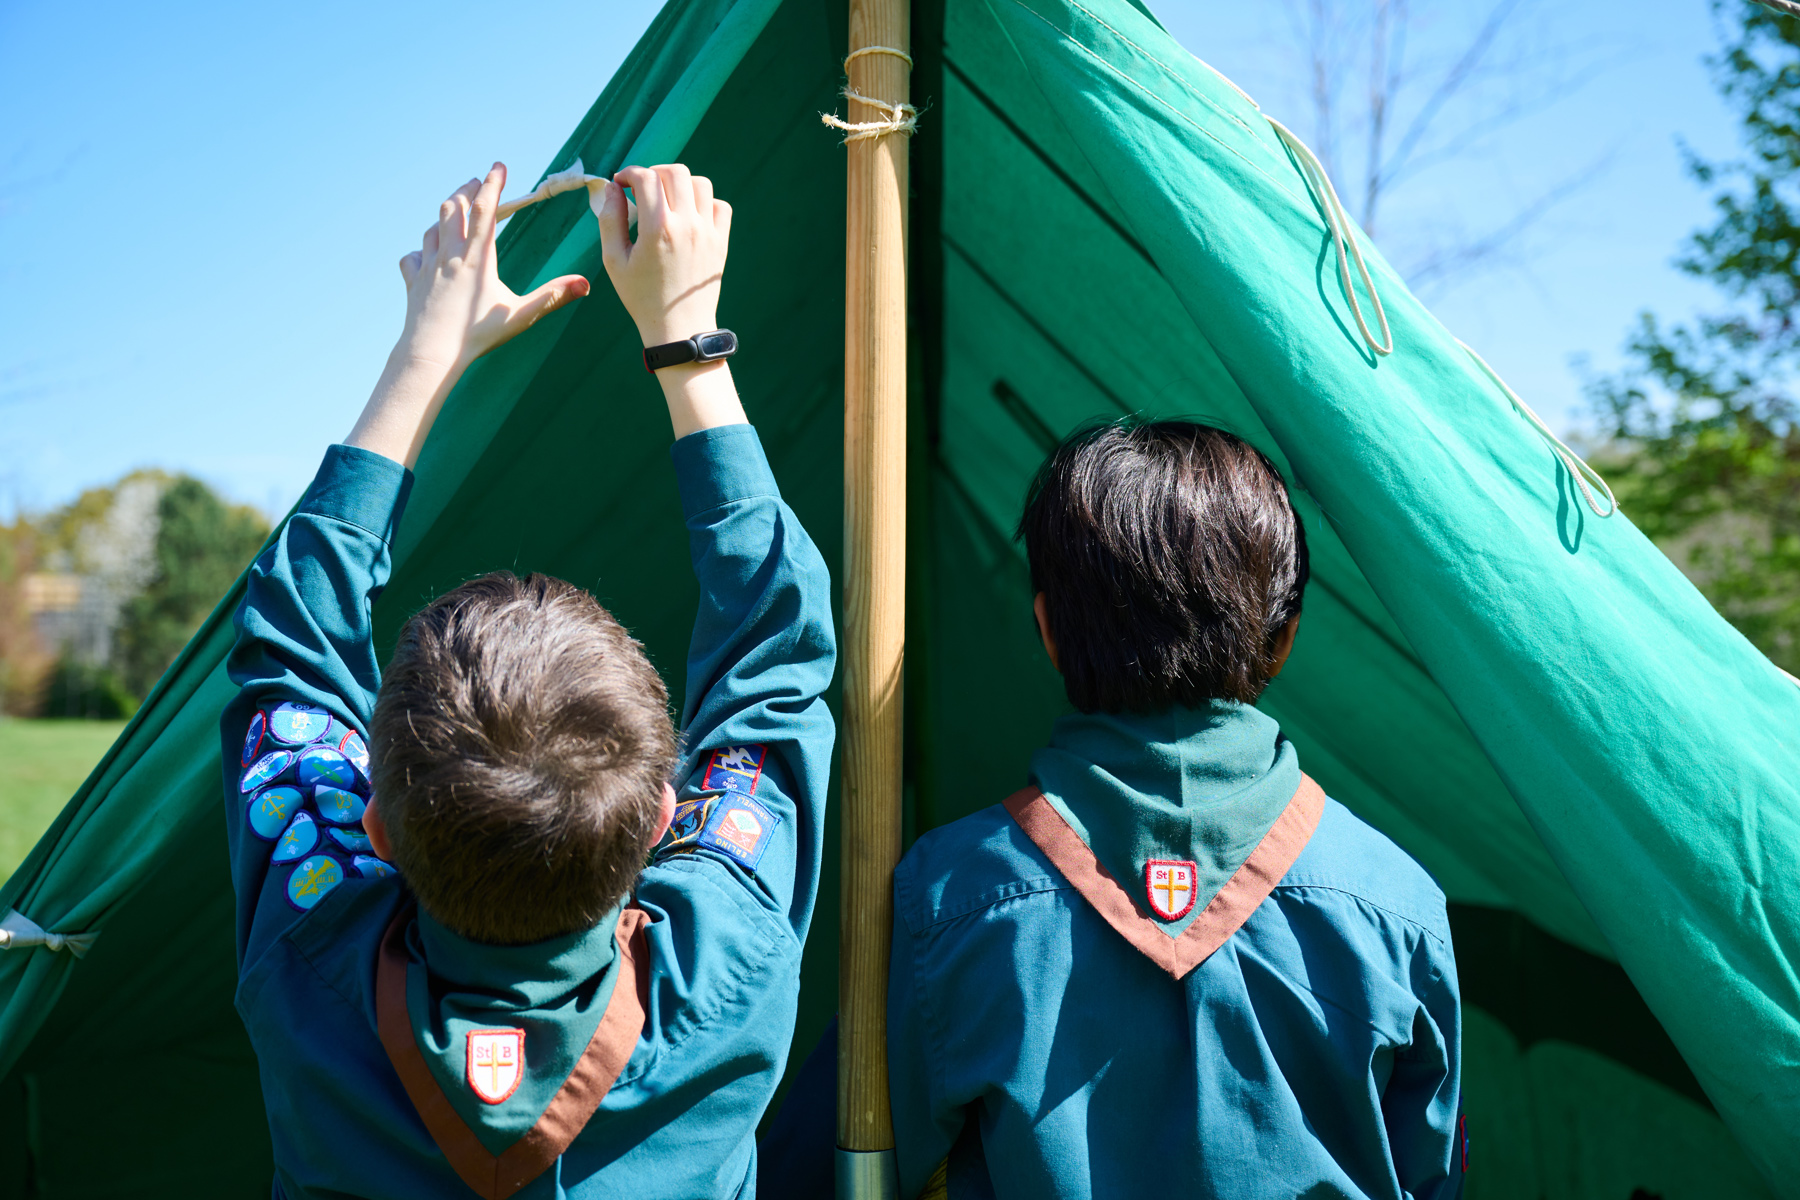 The image shows the back of two Scouts who are facing a tent. They're both in uniform with neckers on. The Scout to the left has brown hair and is holding their hands up and holding part of the green tent.